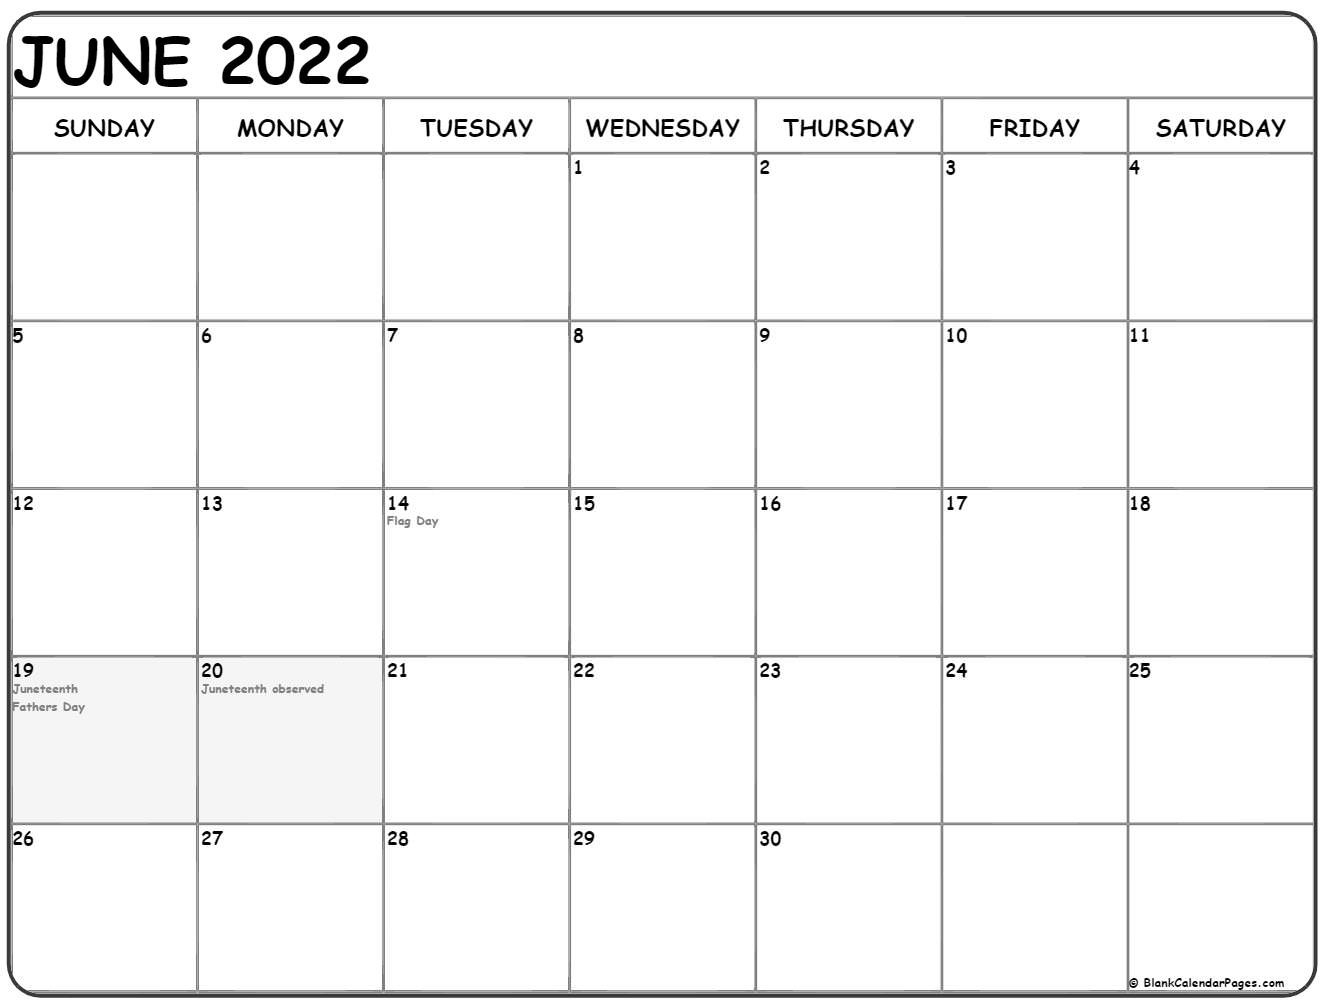 June 2022 With Holidays Calendar  Calendar For June 2022 With Holidays